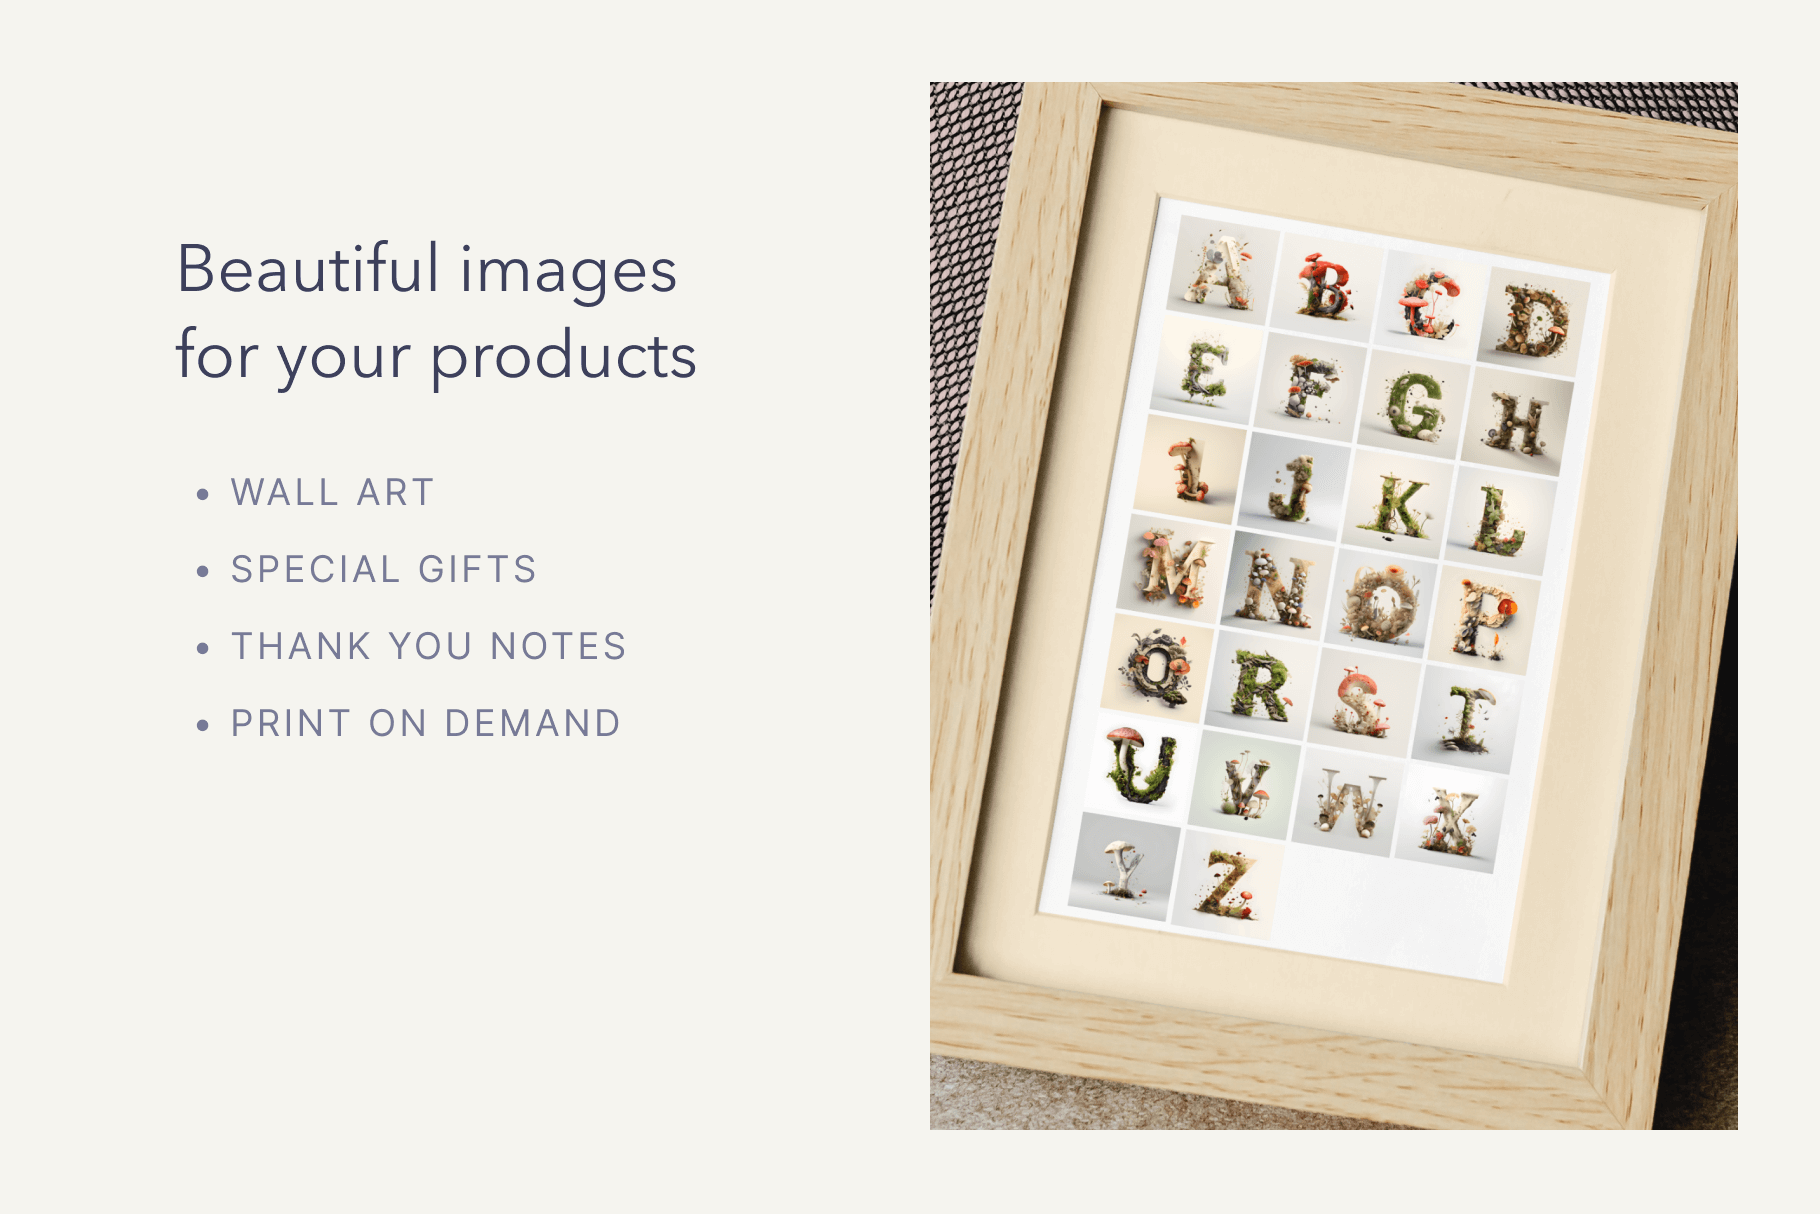 A photograph of a framed artwork of a fungal themed alphabet showing all letters in square boxes.